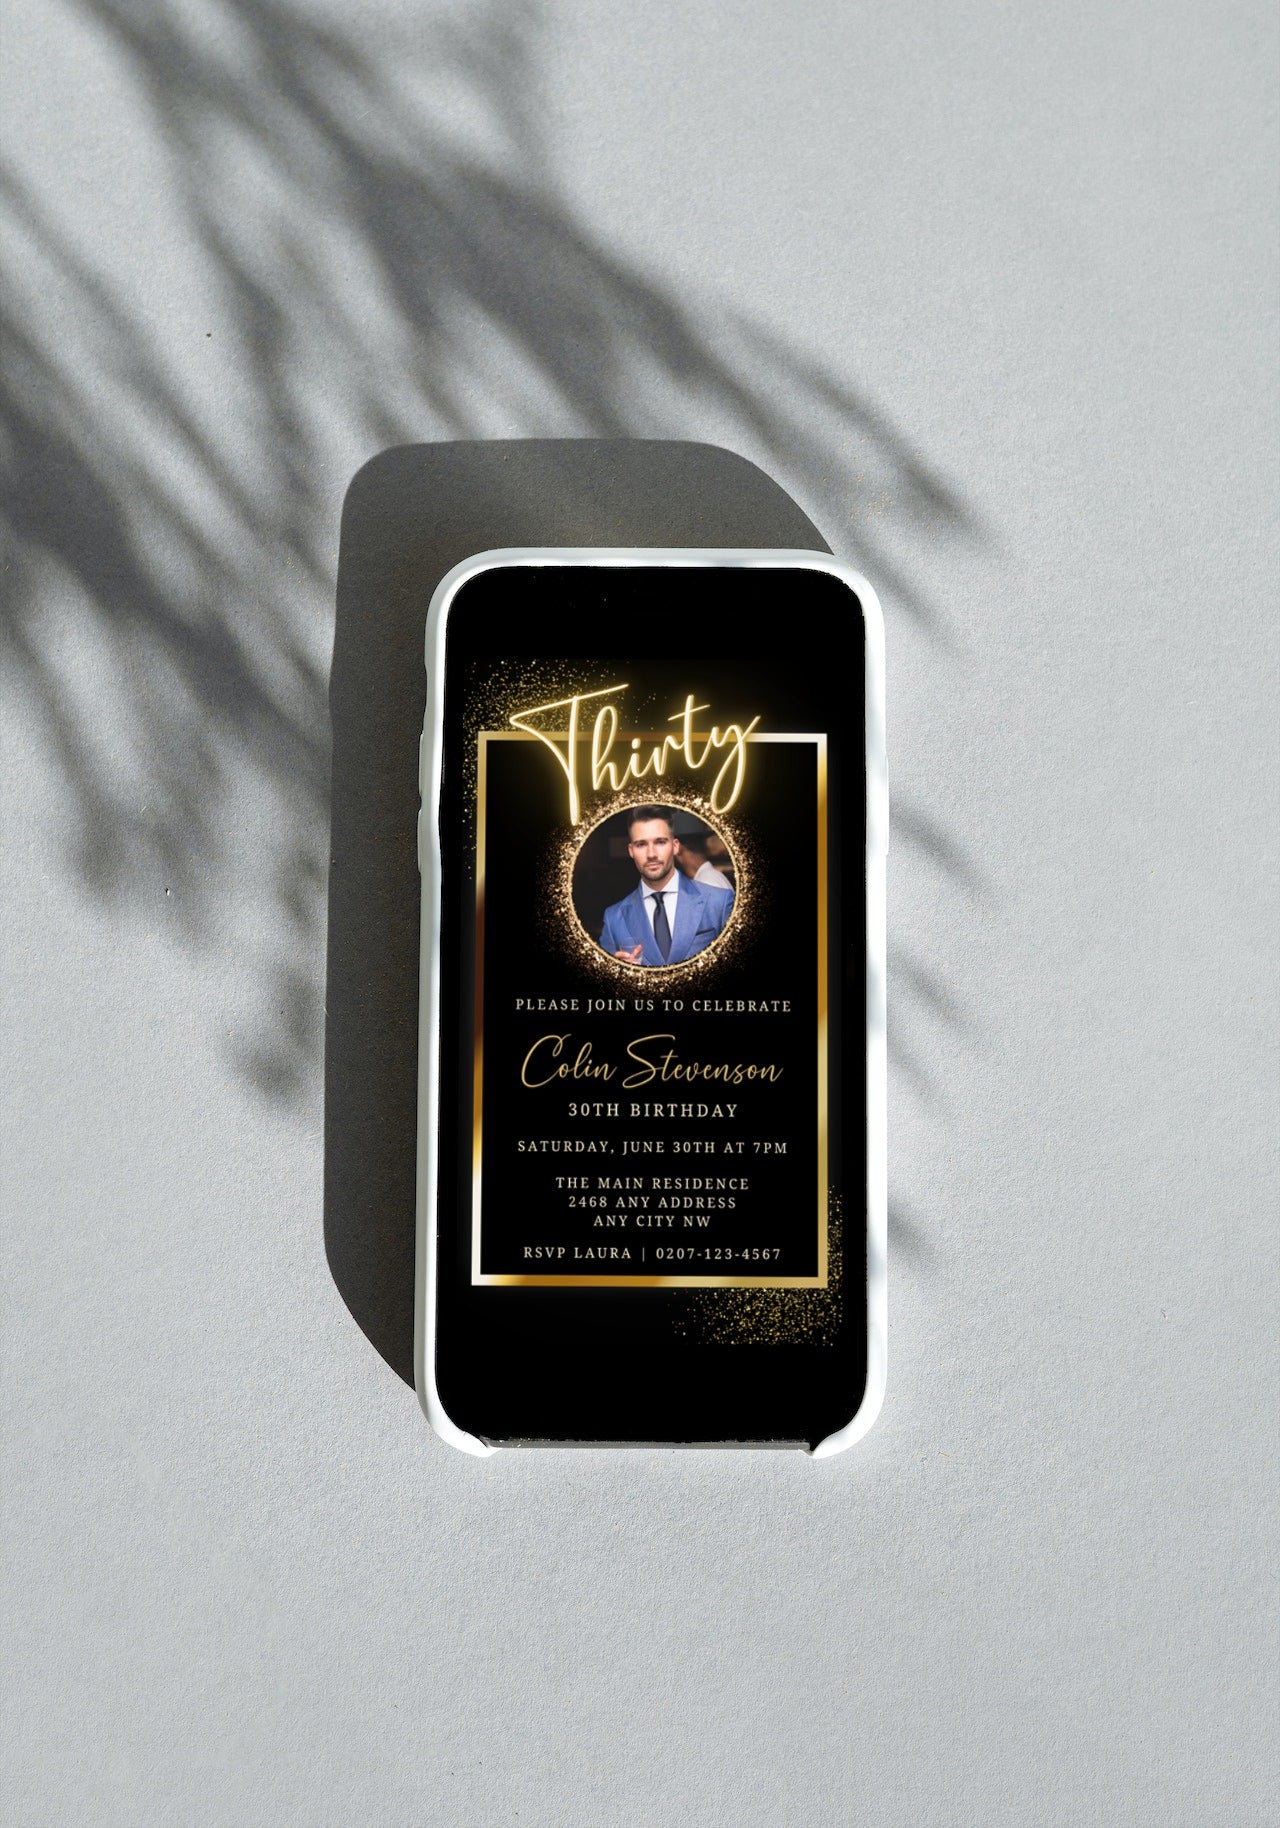 Customizable digital invitation template on a smartphone screen, featuring a man in a suit. Ideal for 30th party evites, editable in Canva.